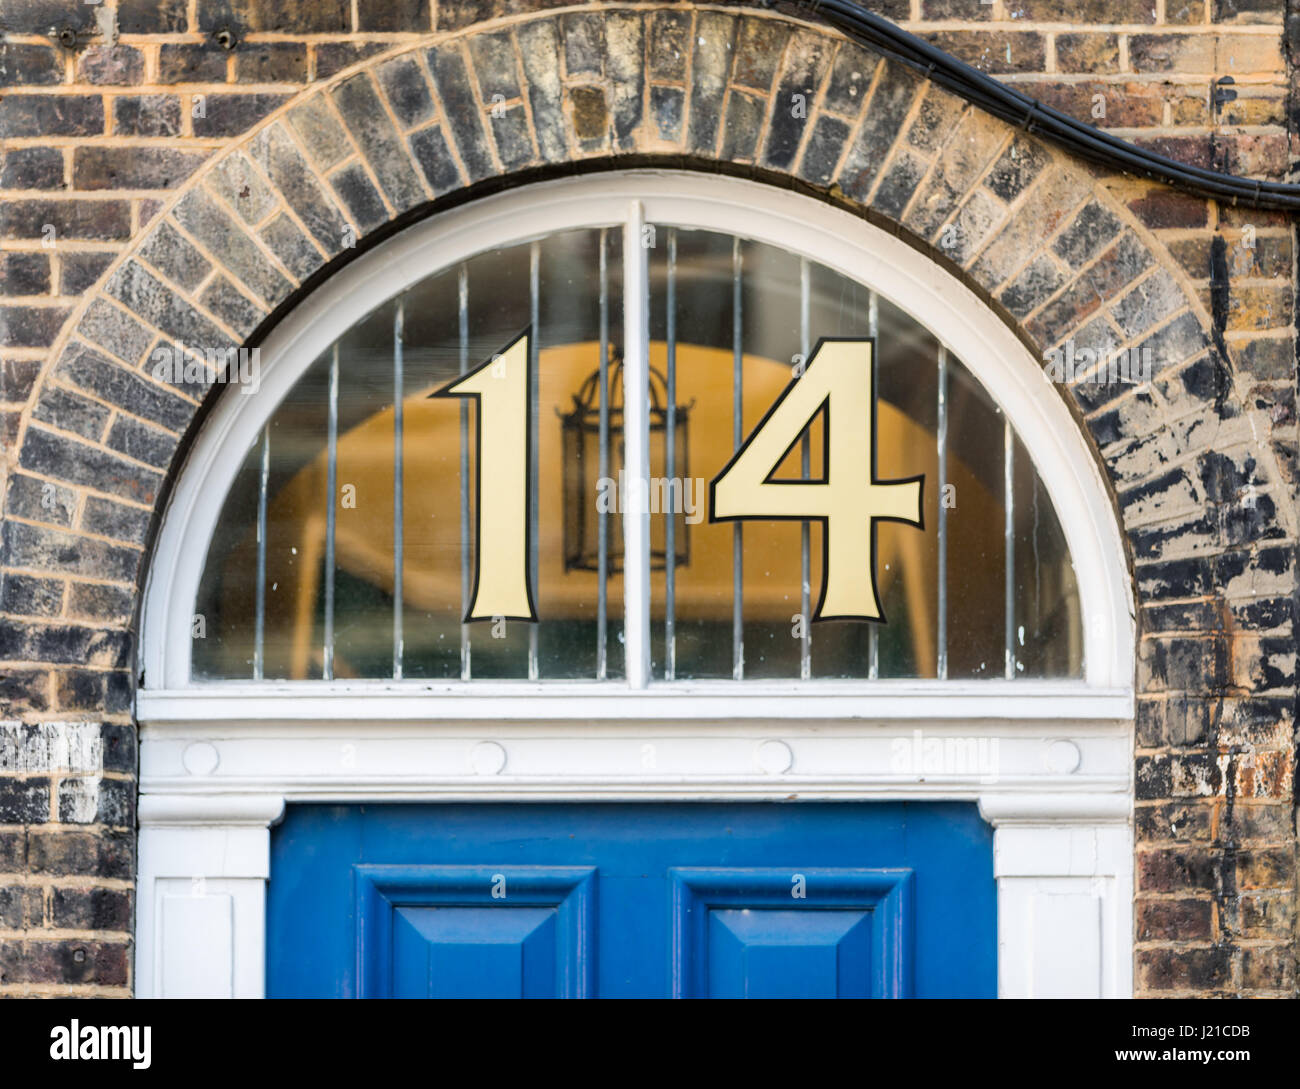 an arched window with the street number 14 in gold, London, England, UK Stock Photo